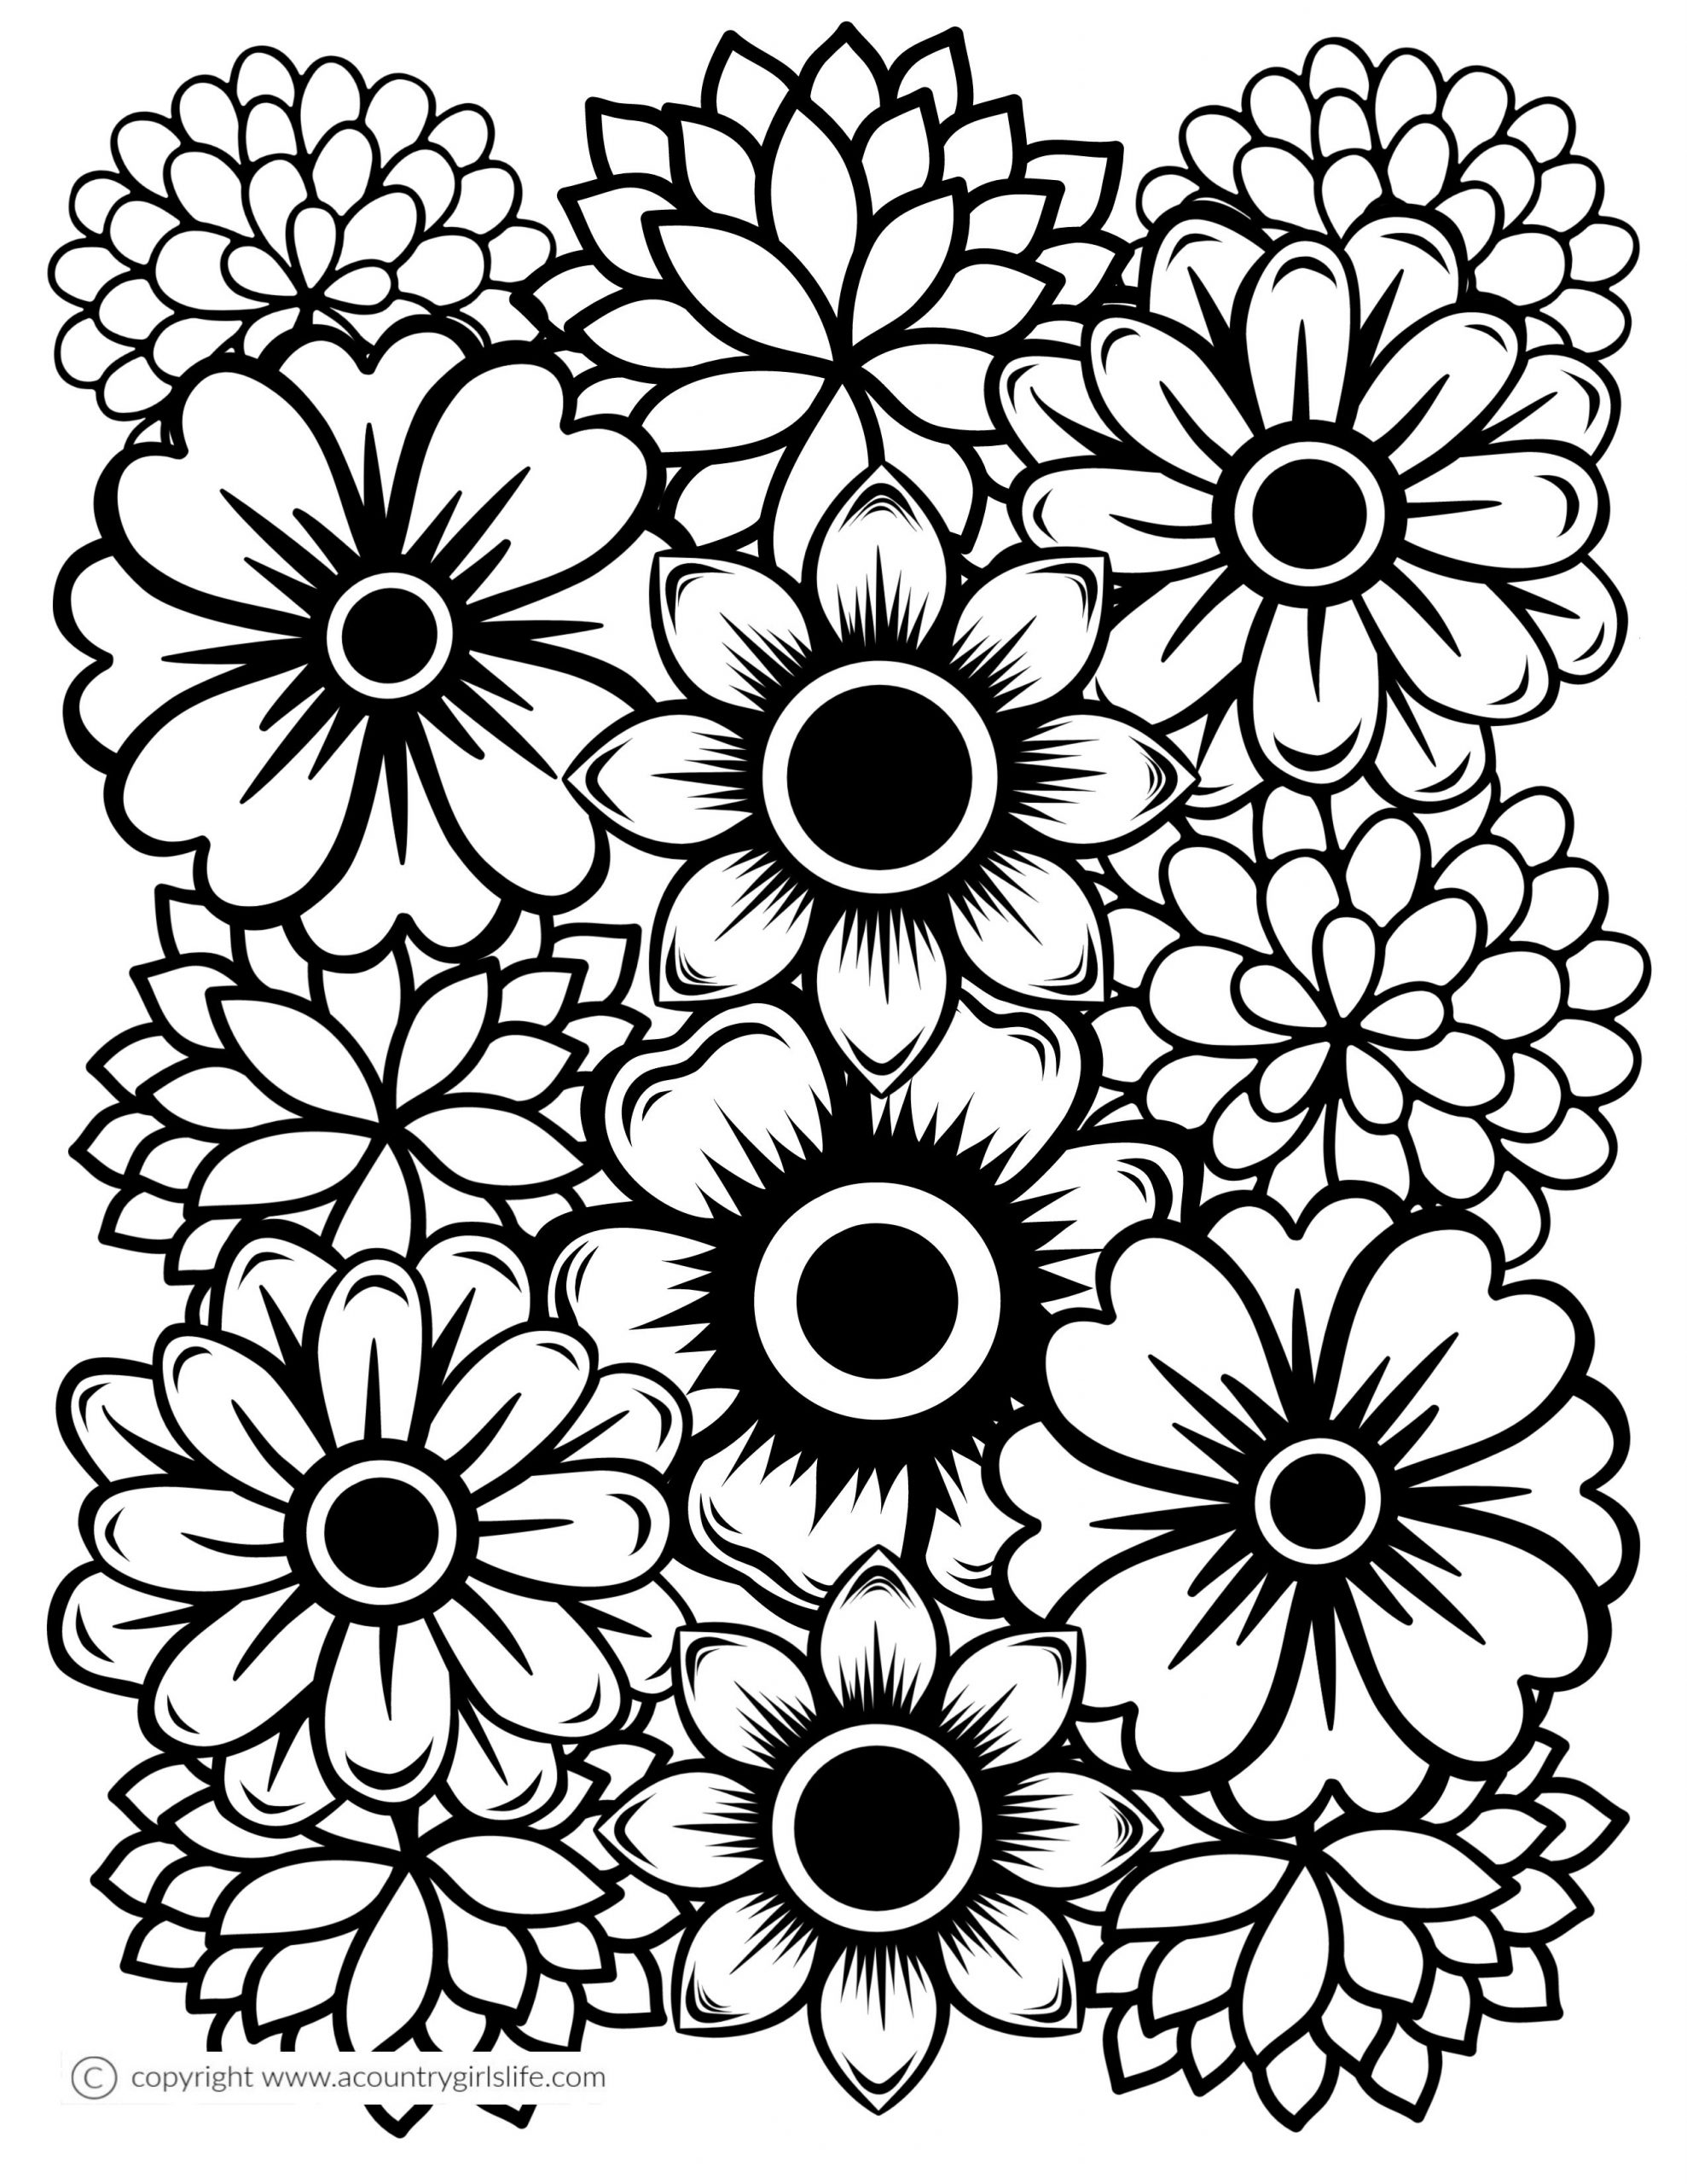 10 free printable holiday adult coloring pages - large print coloring ...